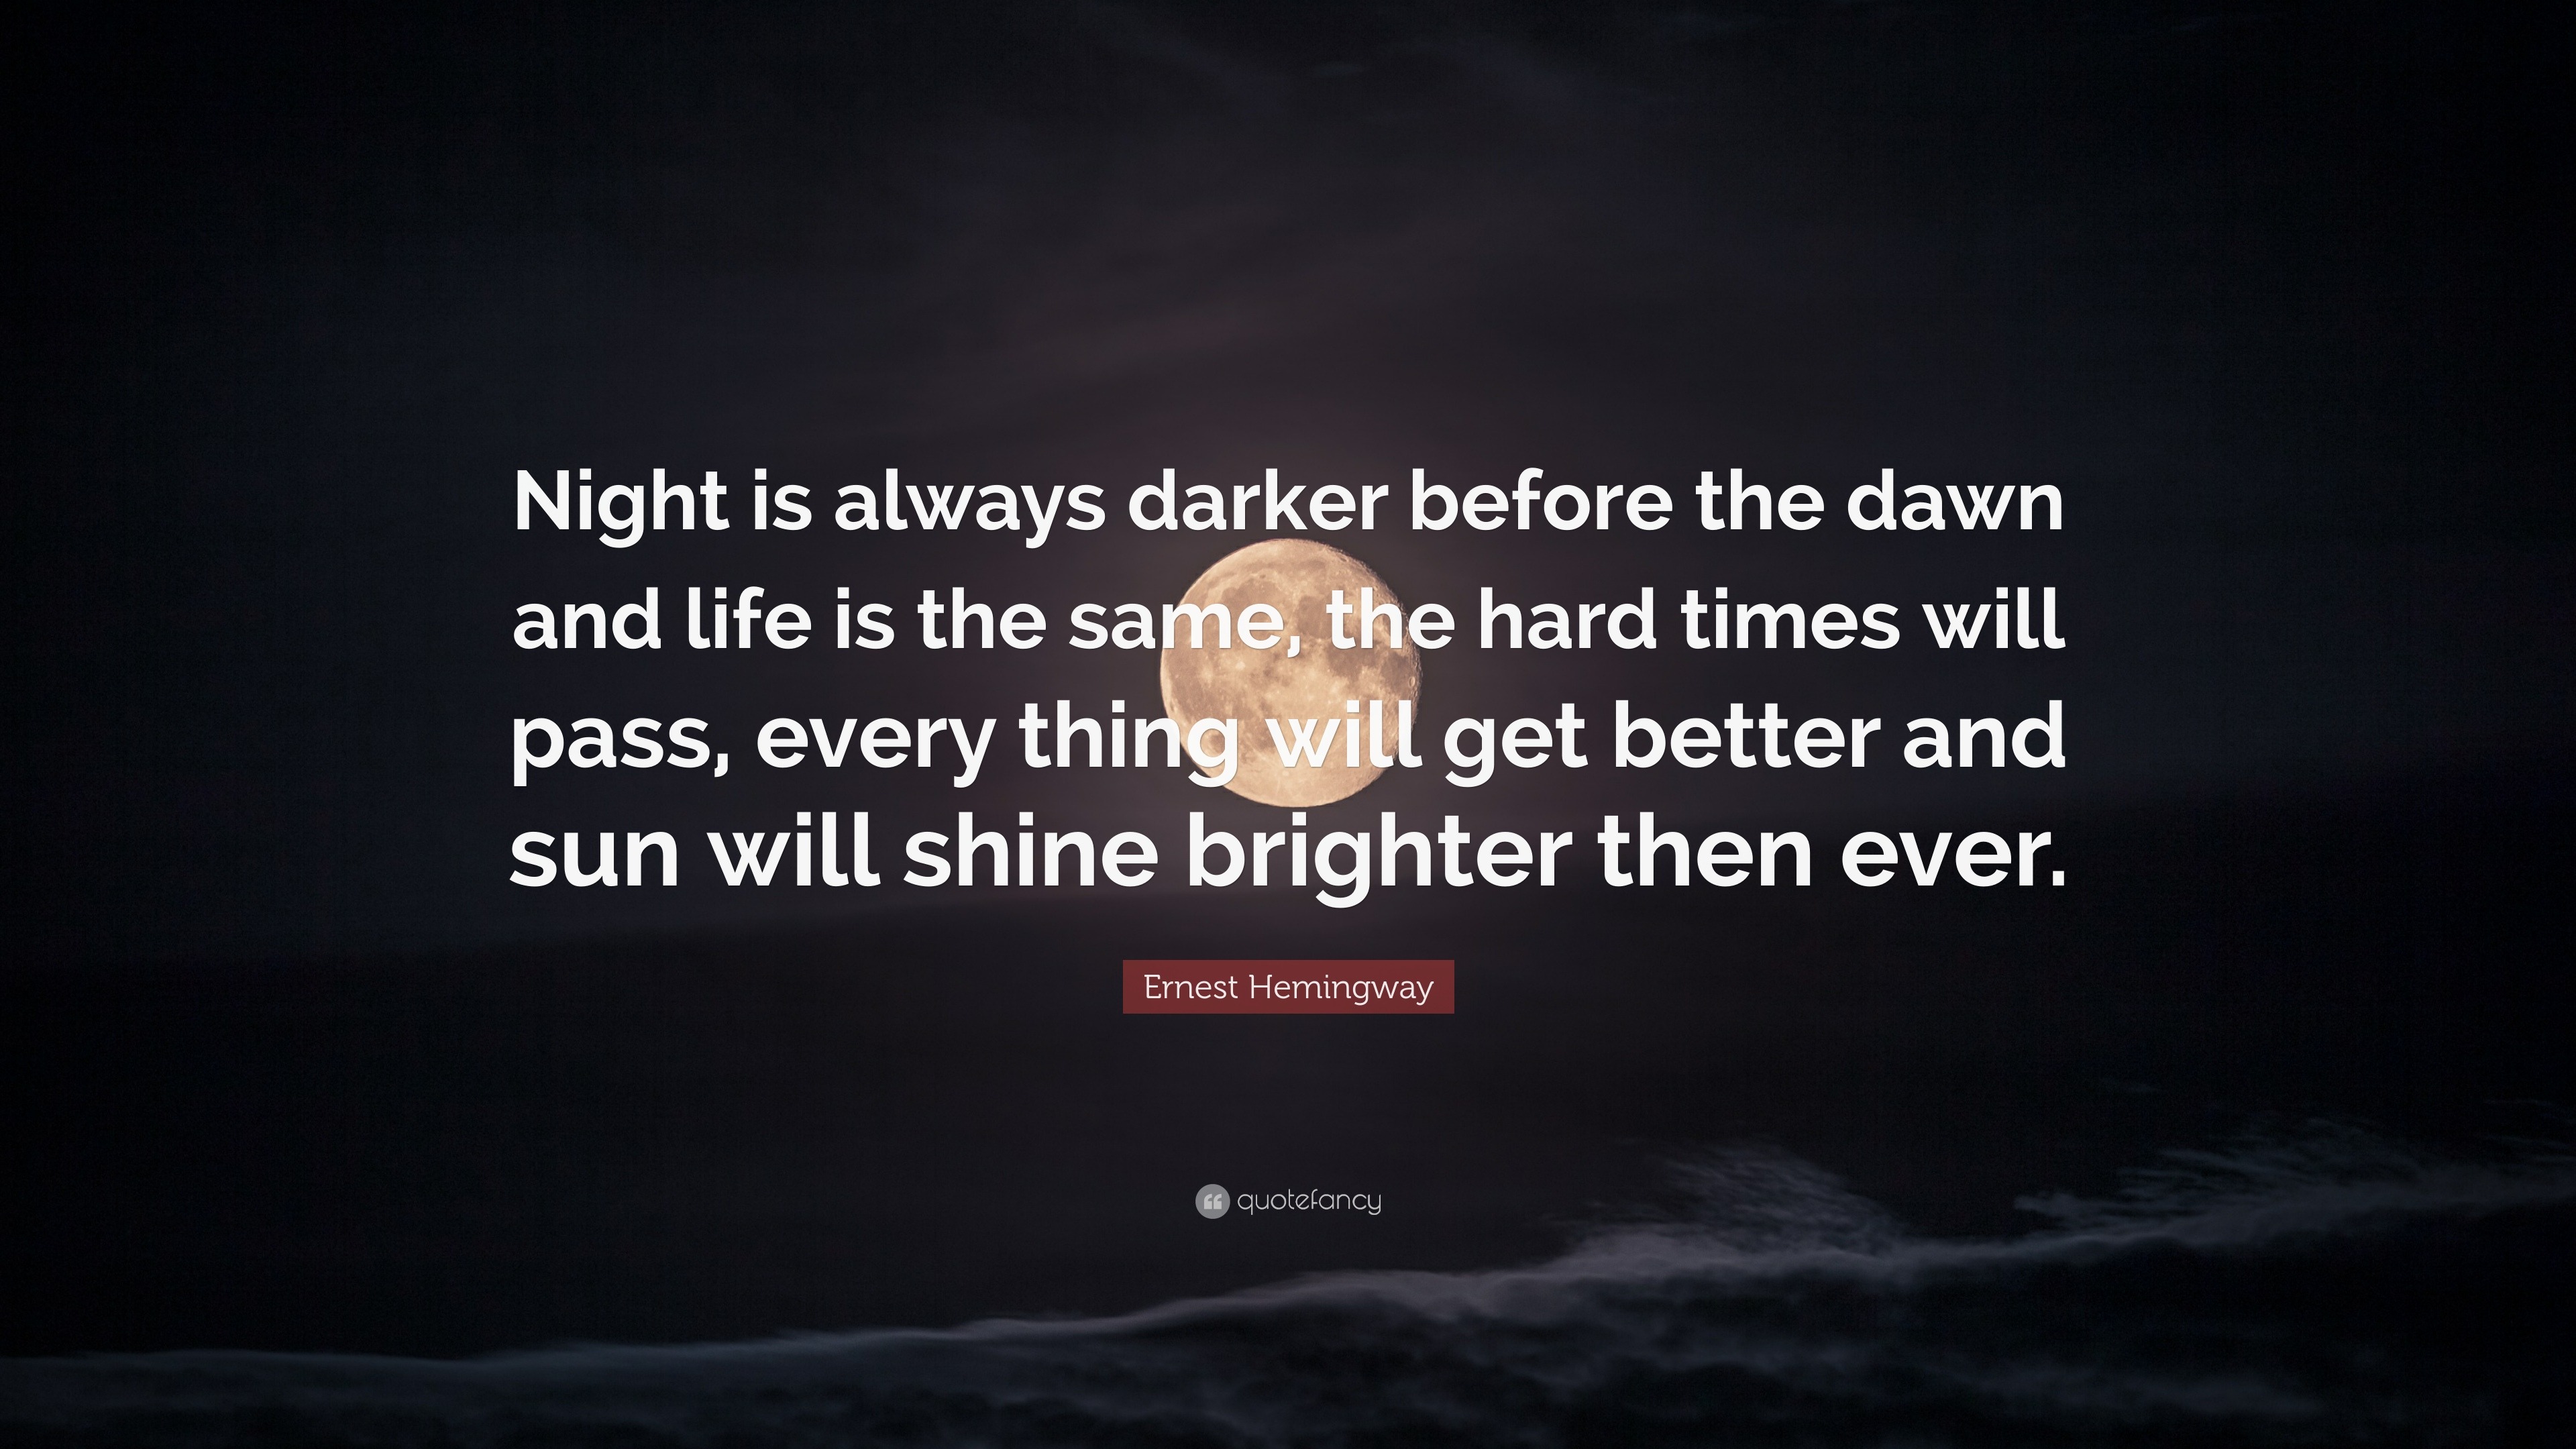 Ernest Hemingway Quote “Night is always darker before the dawn and life is the